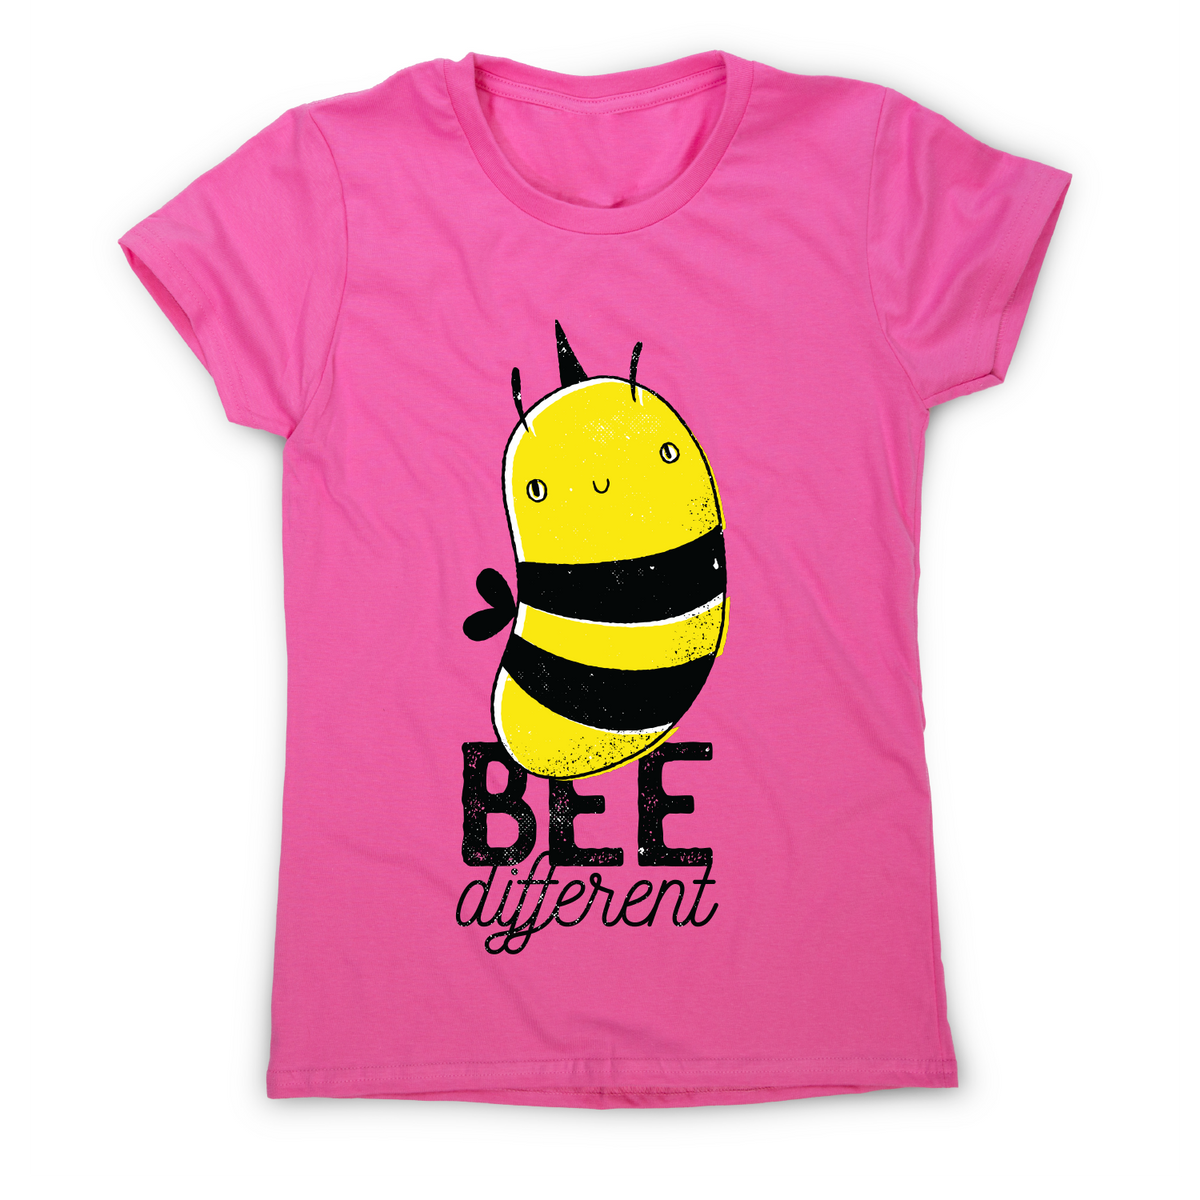 Bee different quote awesome design t-shirt women's– Graphic Gear